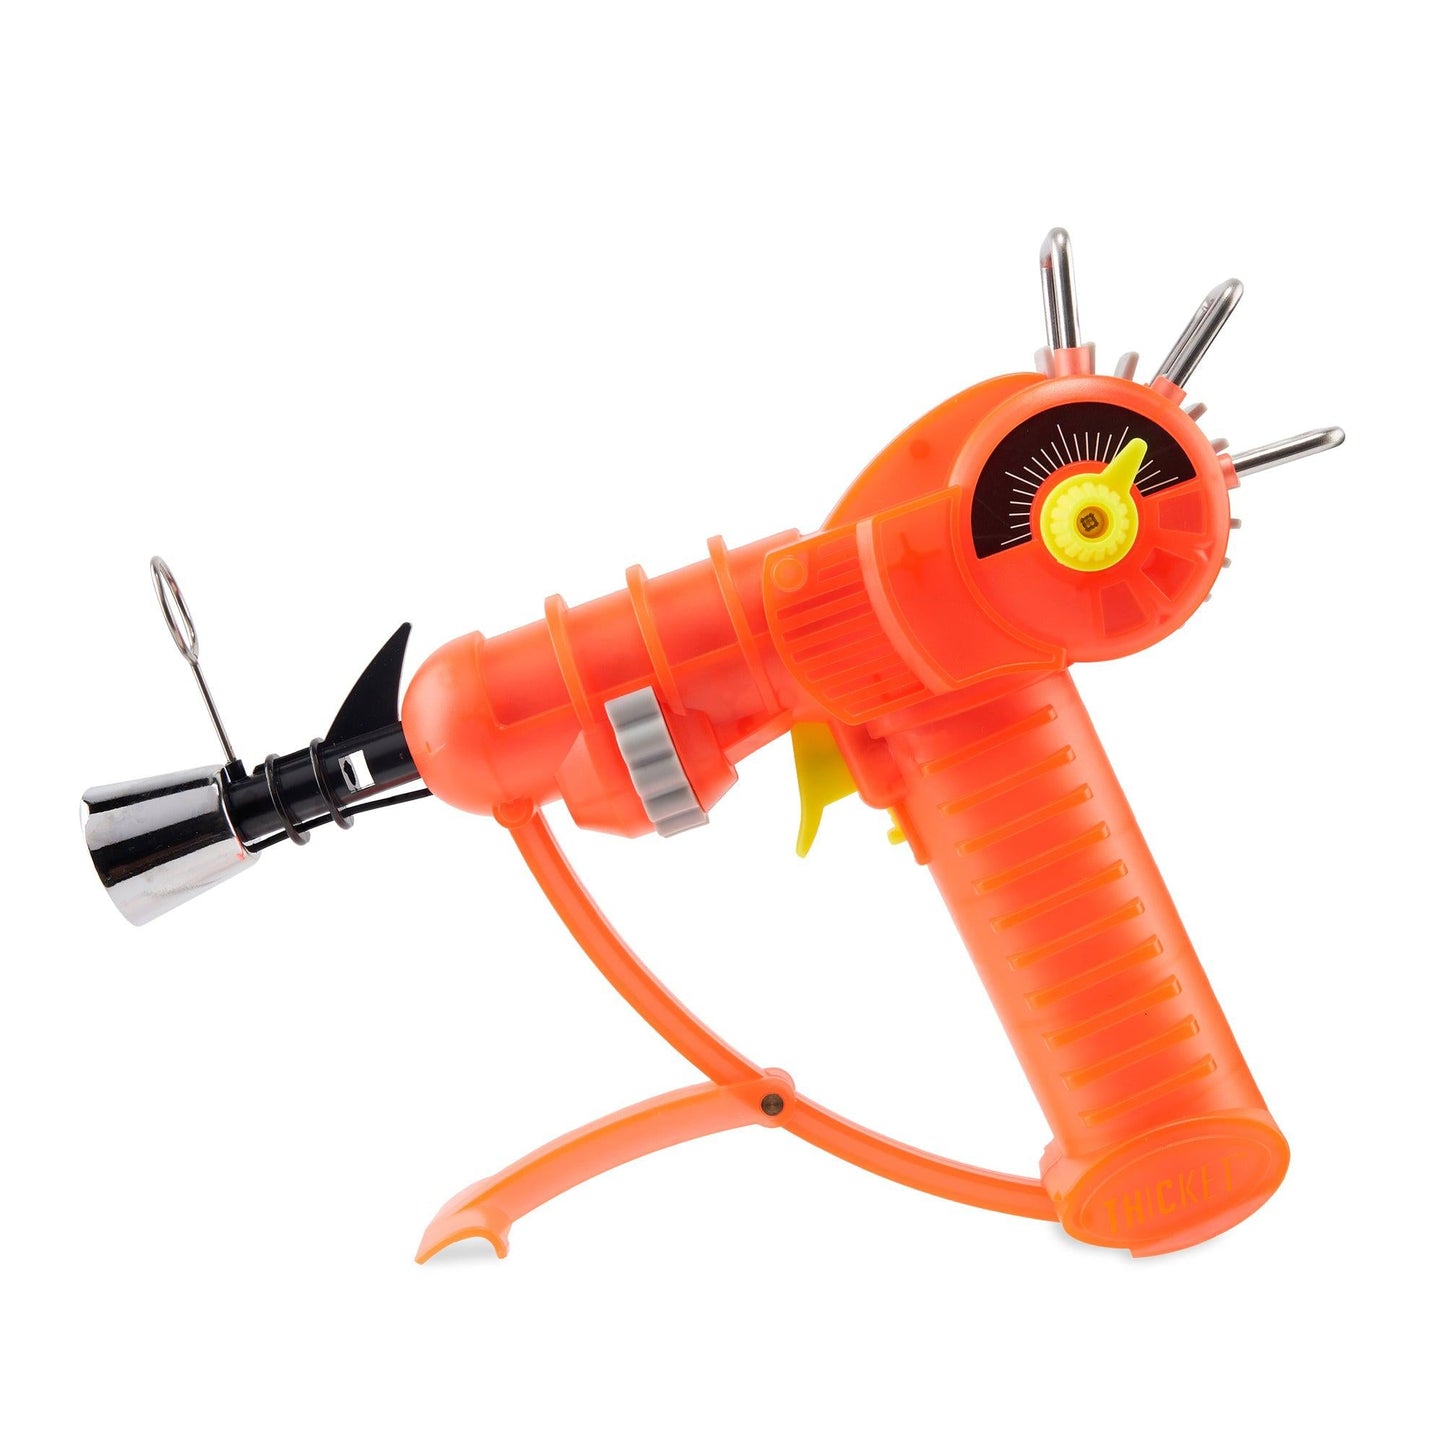 Thicket Spaceout Ray Gun Torch | Glow in the Dark